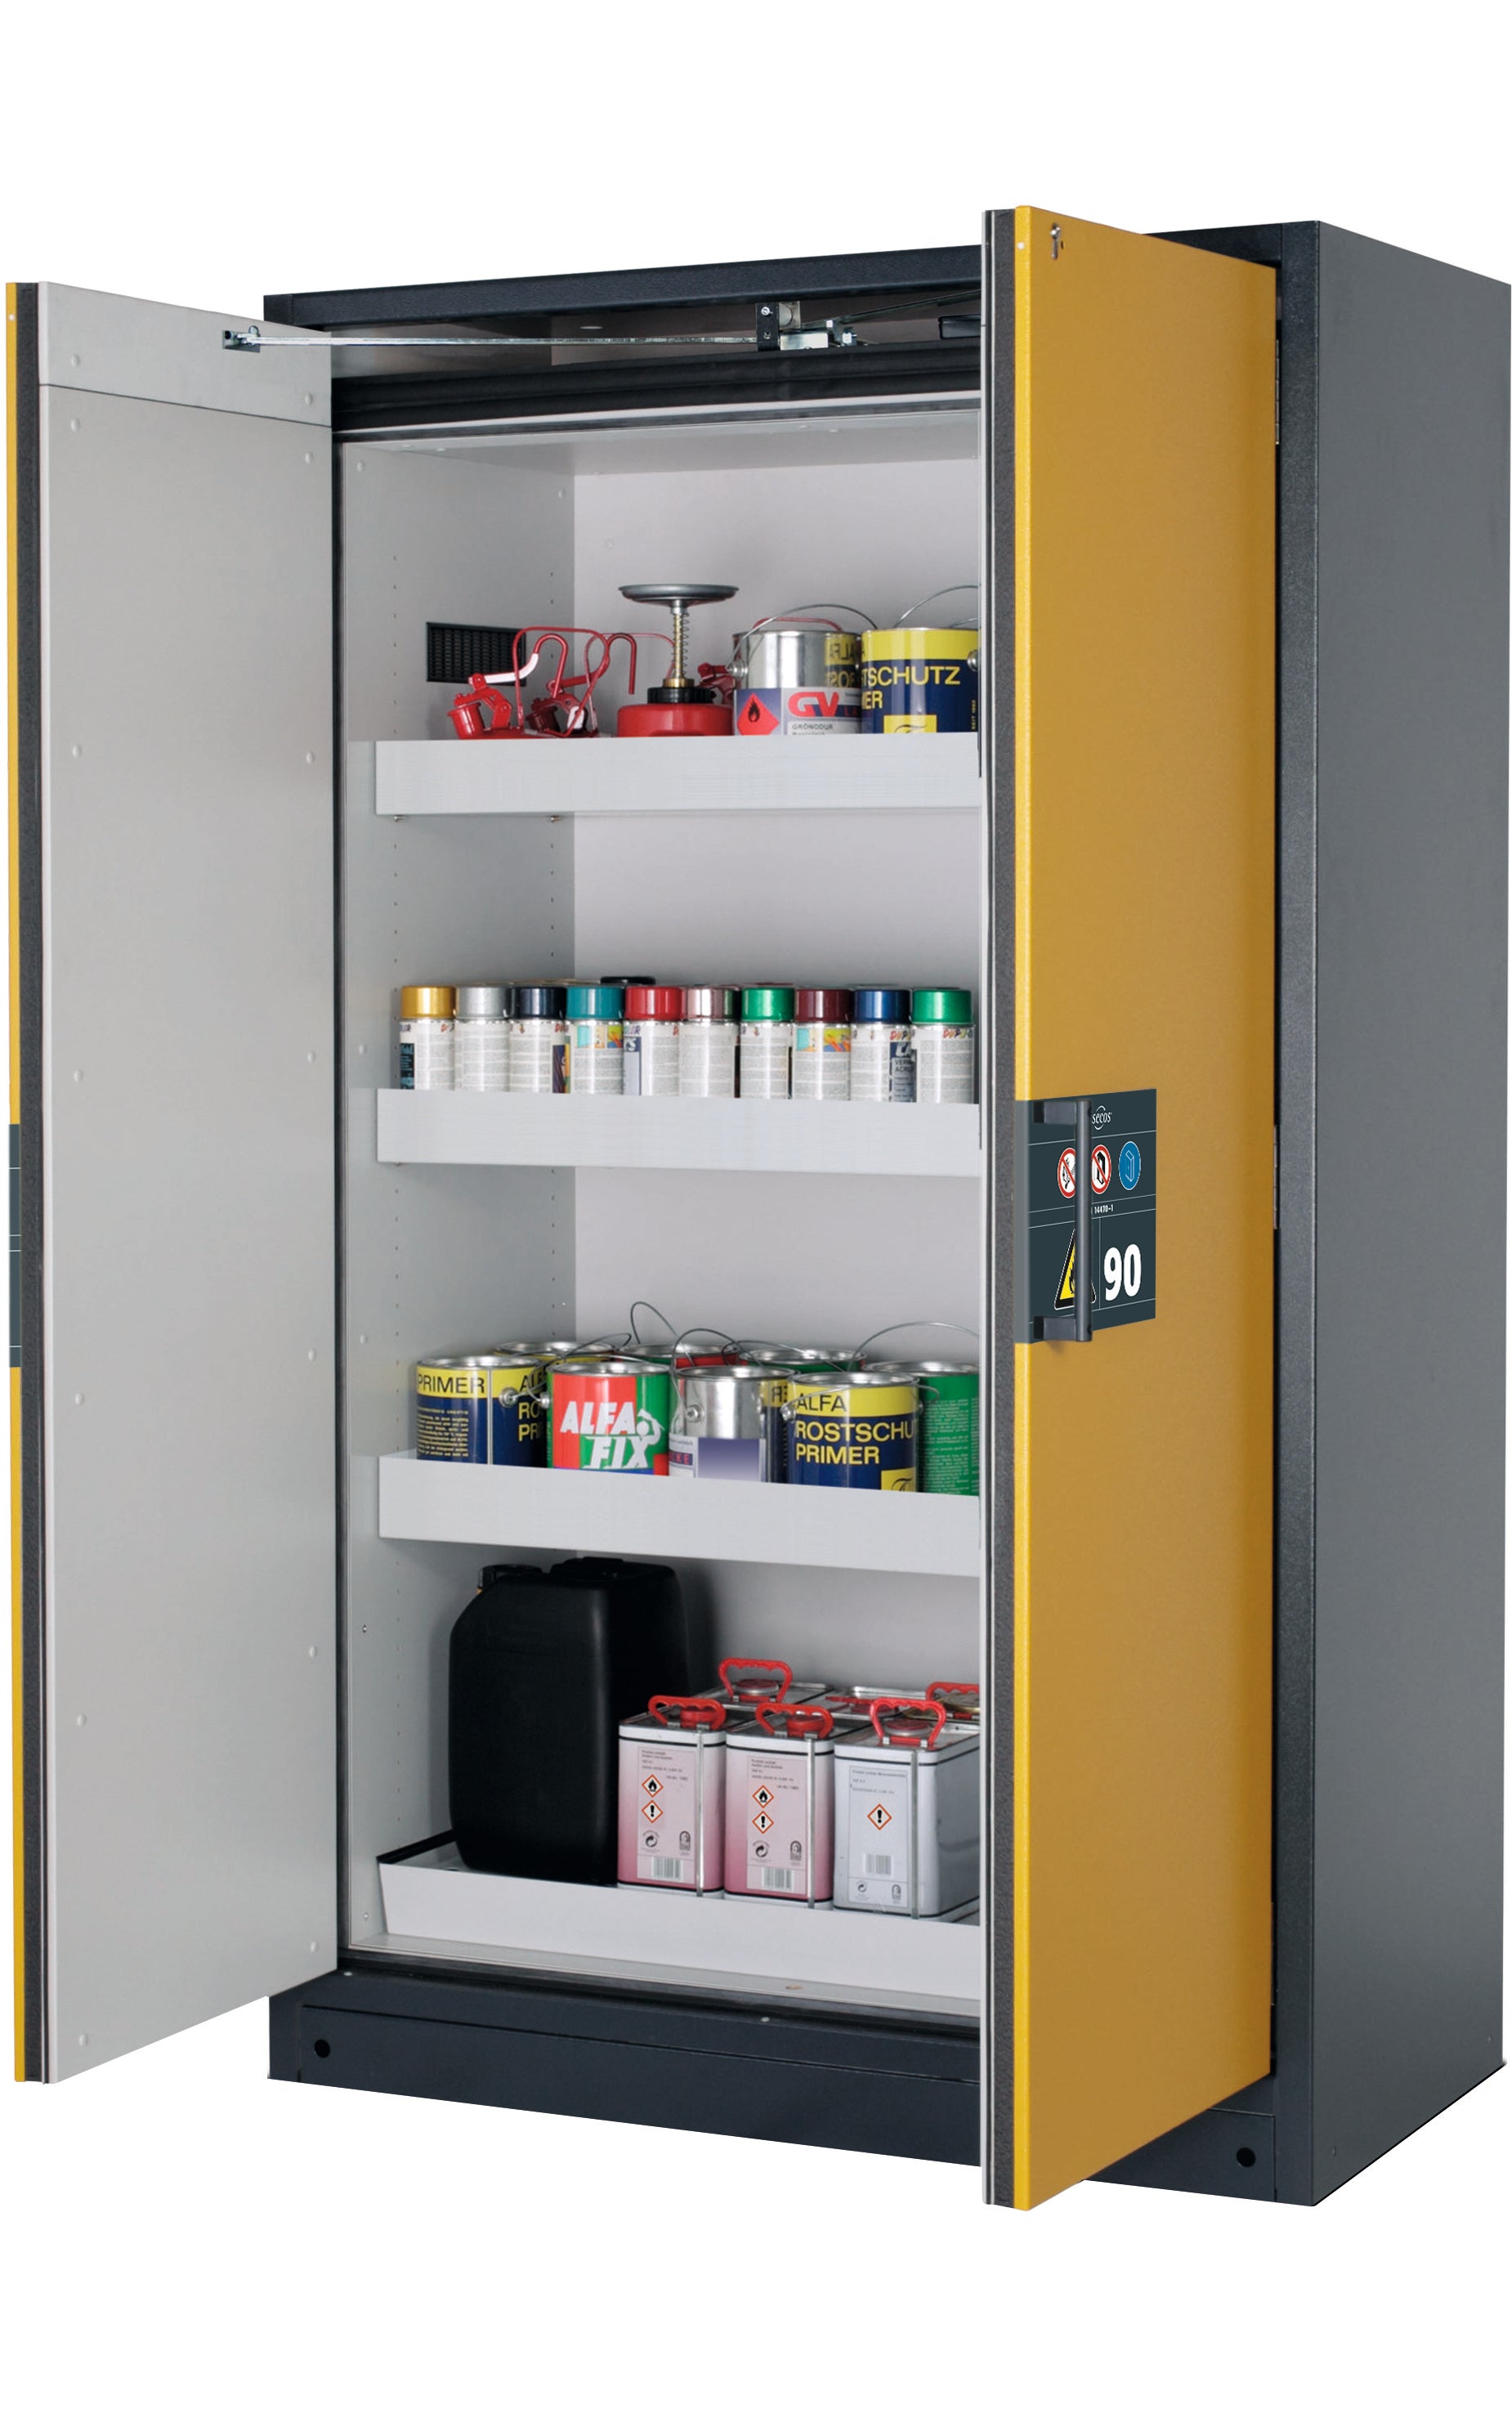 Type 90 safety storage cabinet Q-PEGASUS-90 model Q90.195.120.WDAC in warning yellow RAL 1004 with 3x tray shelf (standard) (sheet steel),